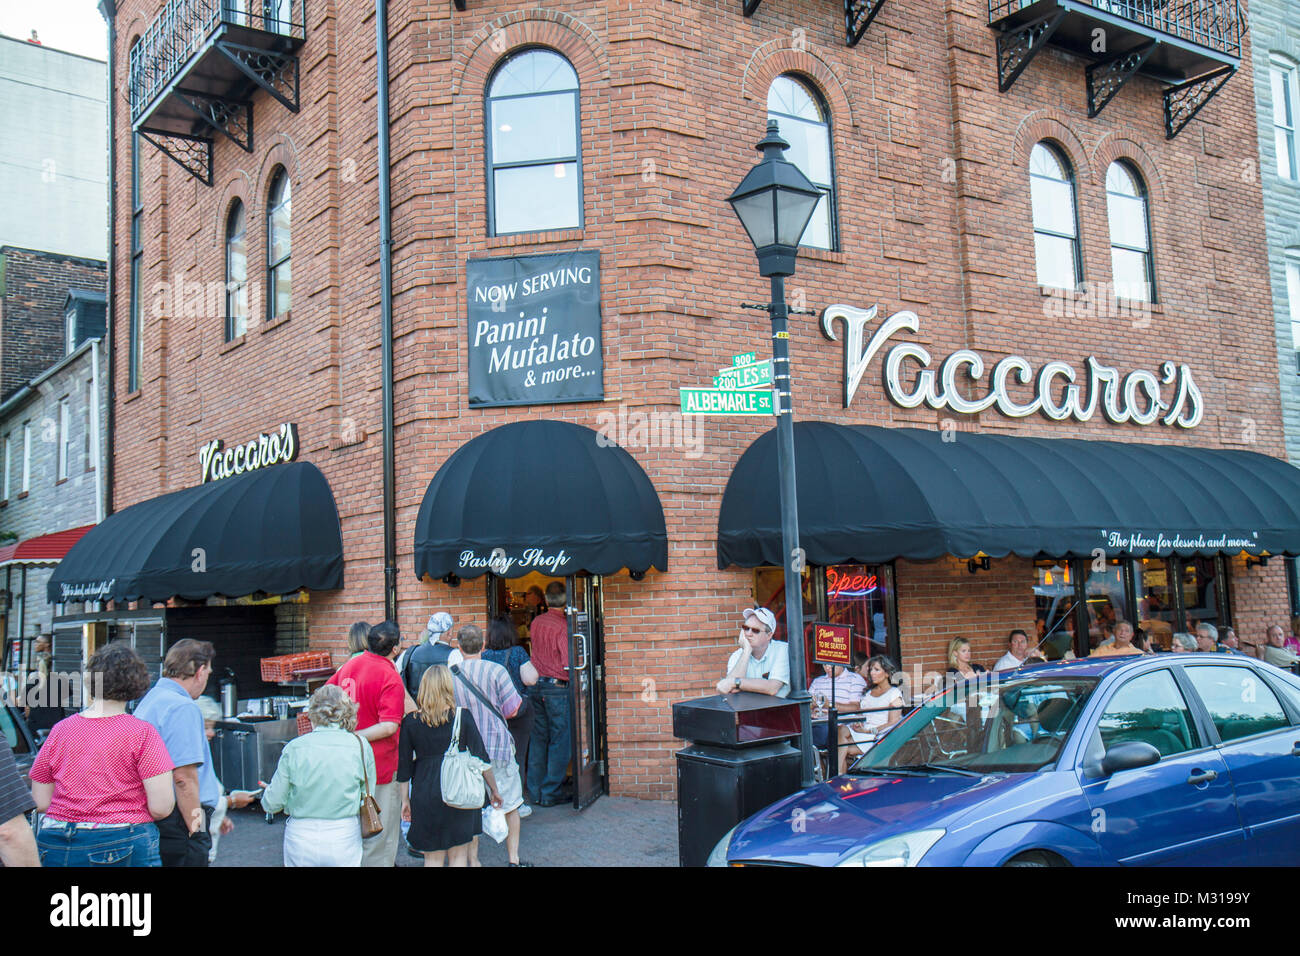 Baltimore Maryland,Little Italy neighborhood,Vaccaro's,bakery,restaurant restaurants food dining cafe cafes,entrance,front,line out the door,queue,wai Stock Photo